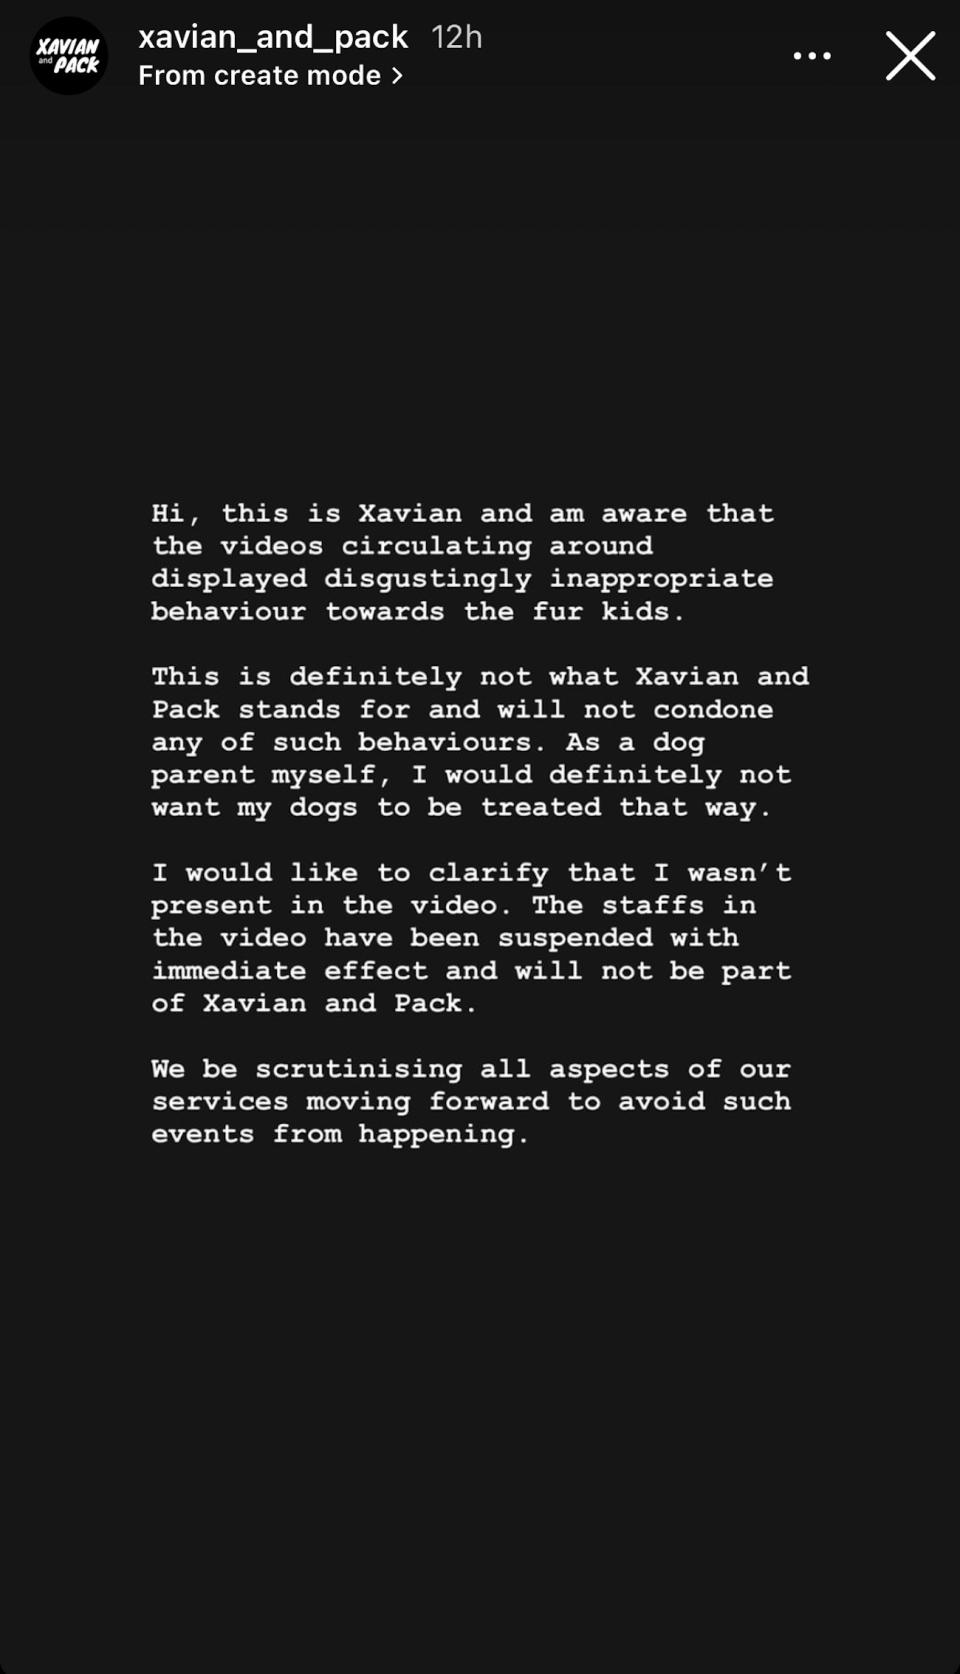 Xavian and Pack's founder addresses the controversy, acknowledging 'disgustingly inappropriate behaviour' in response to the incident captured in circulating videos.